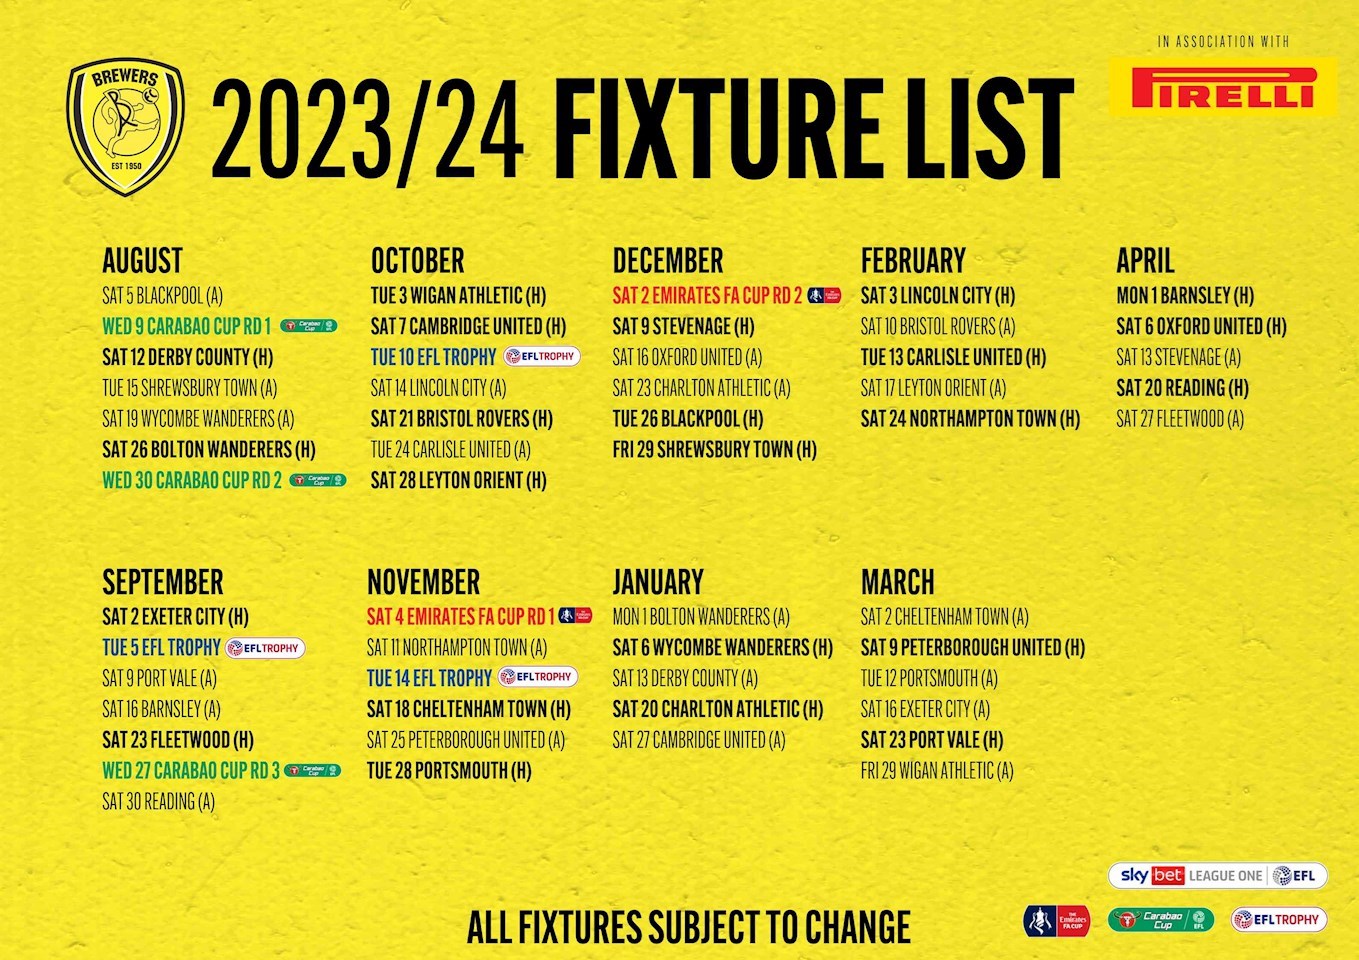 When will the 2023/24 Championship fixtures be released?